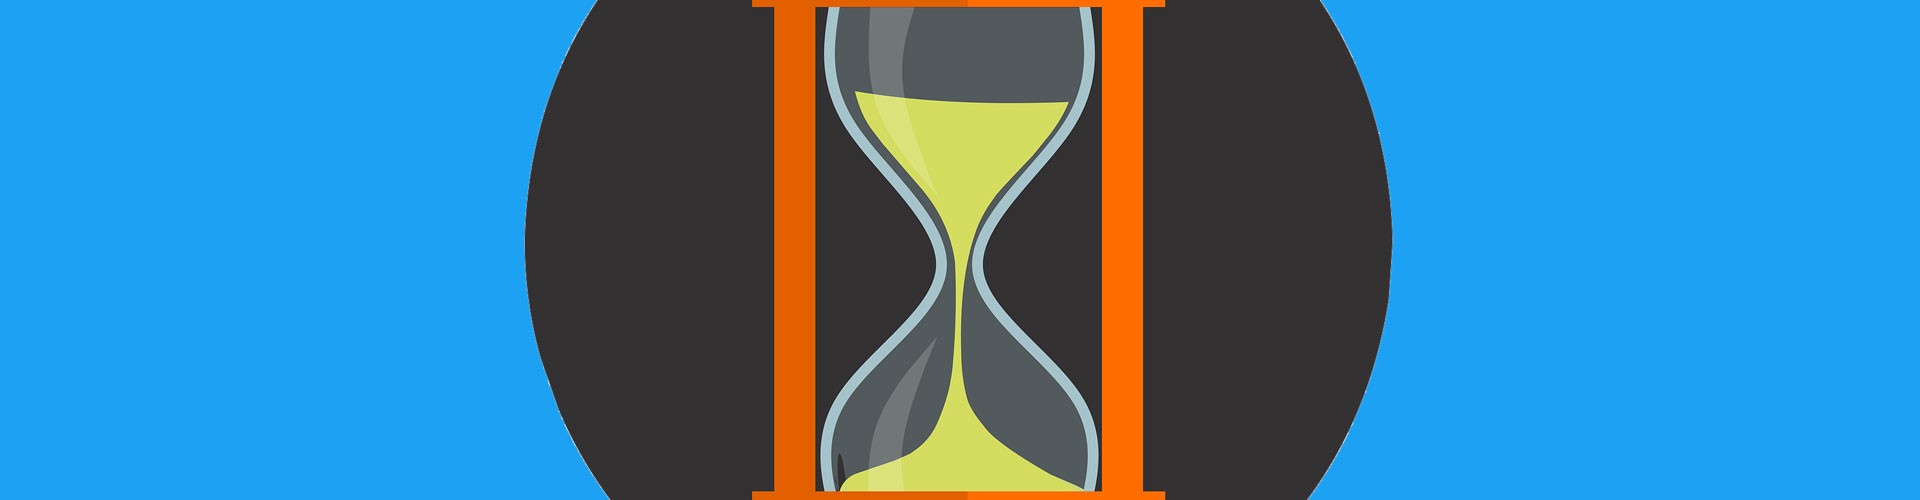 illustration of an hourglass